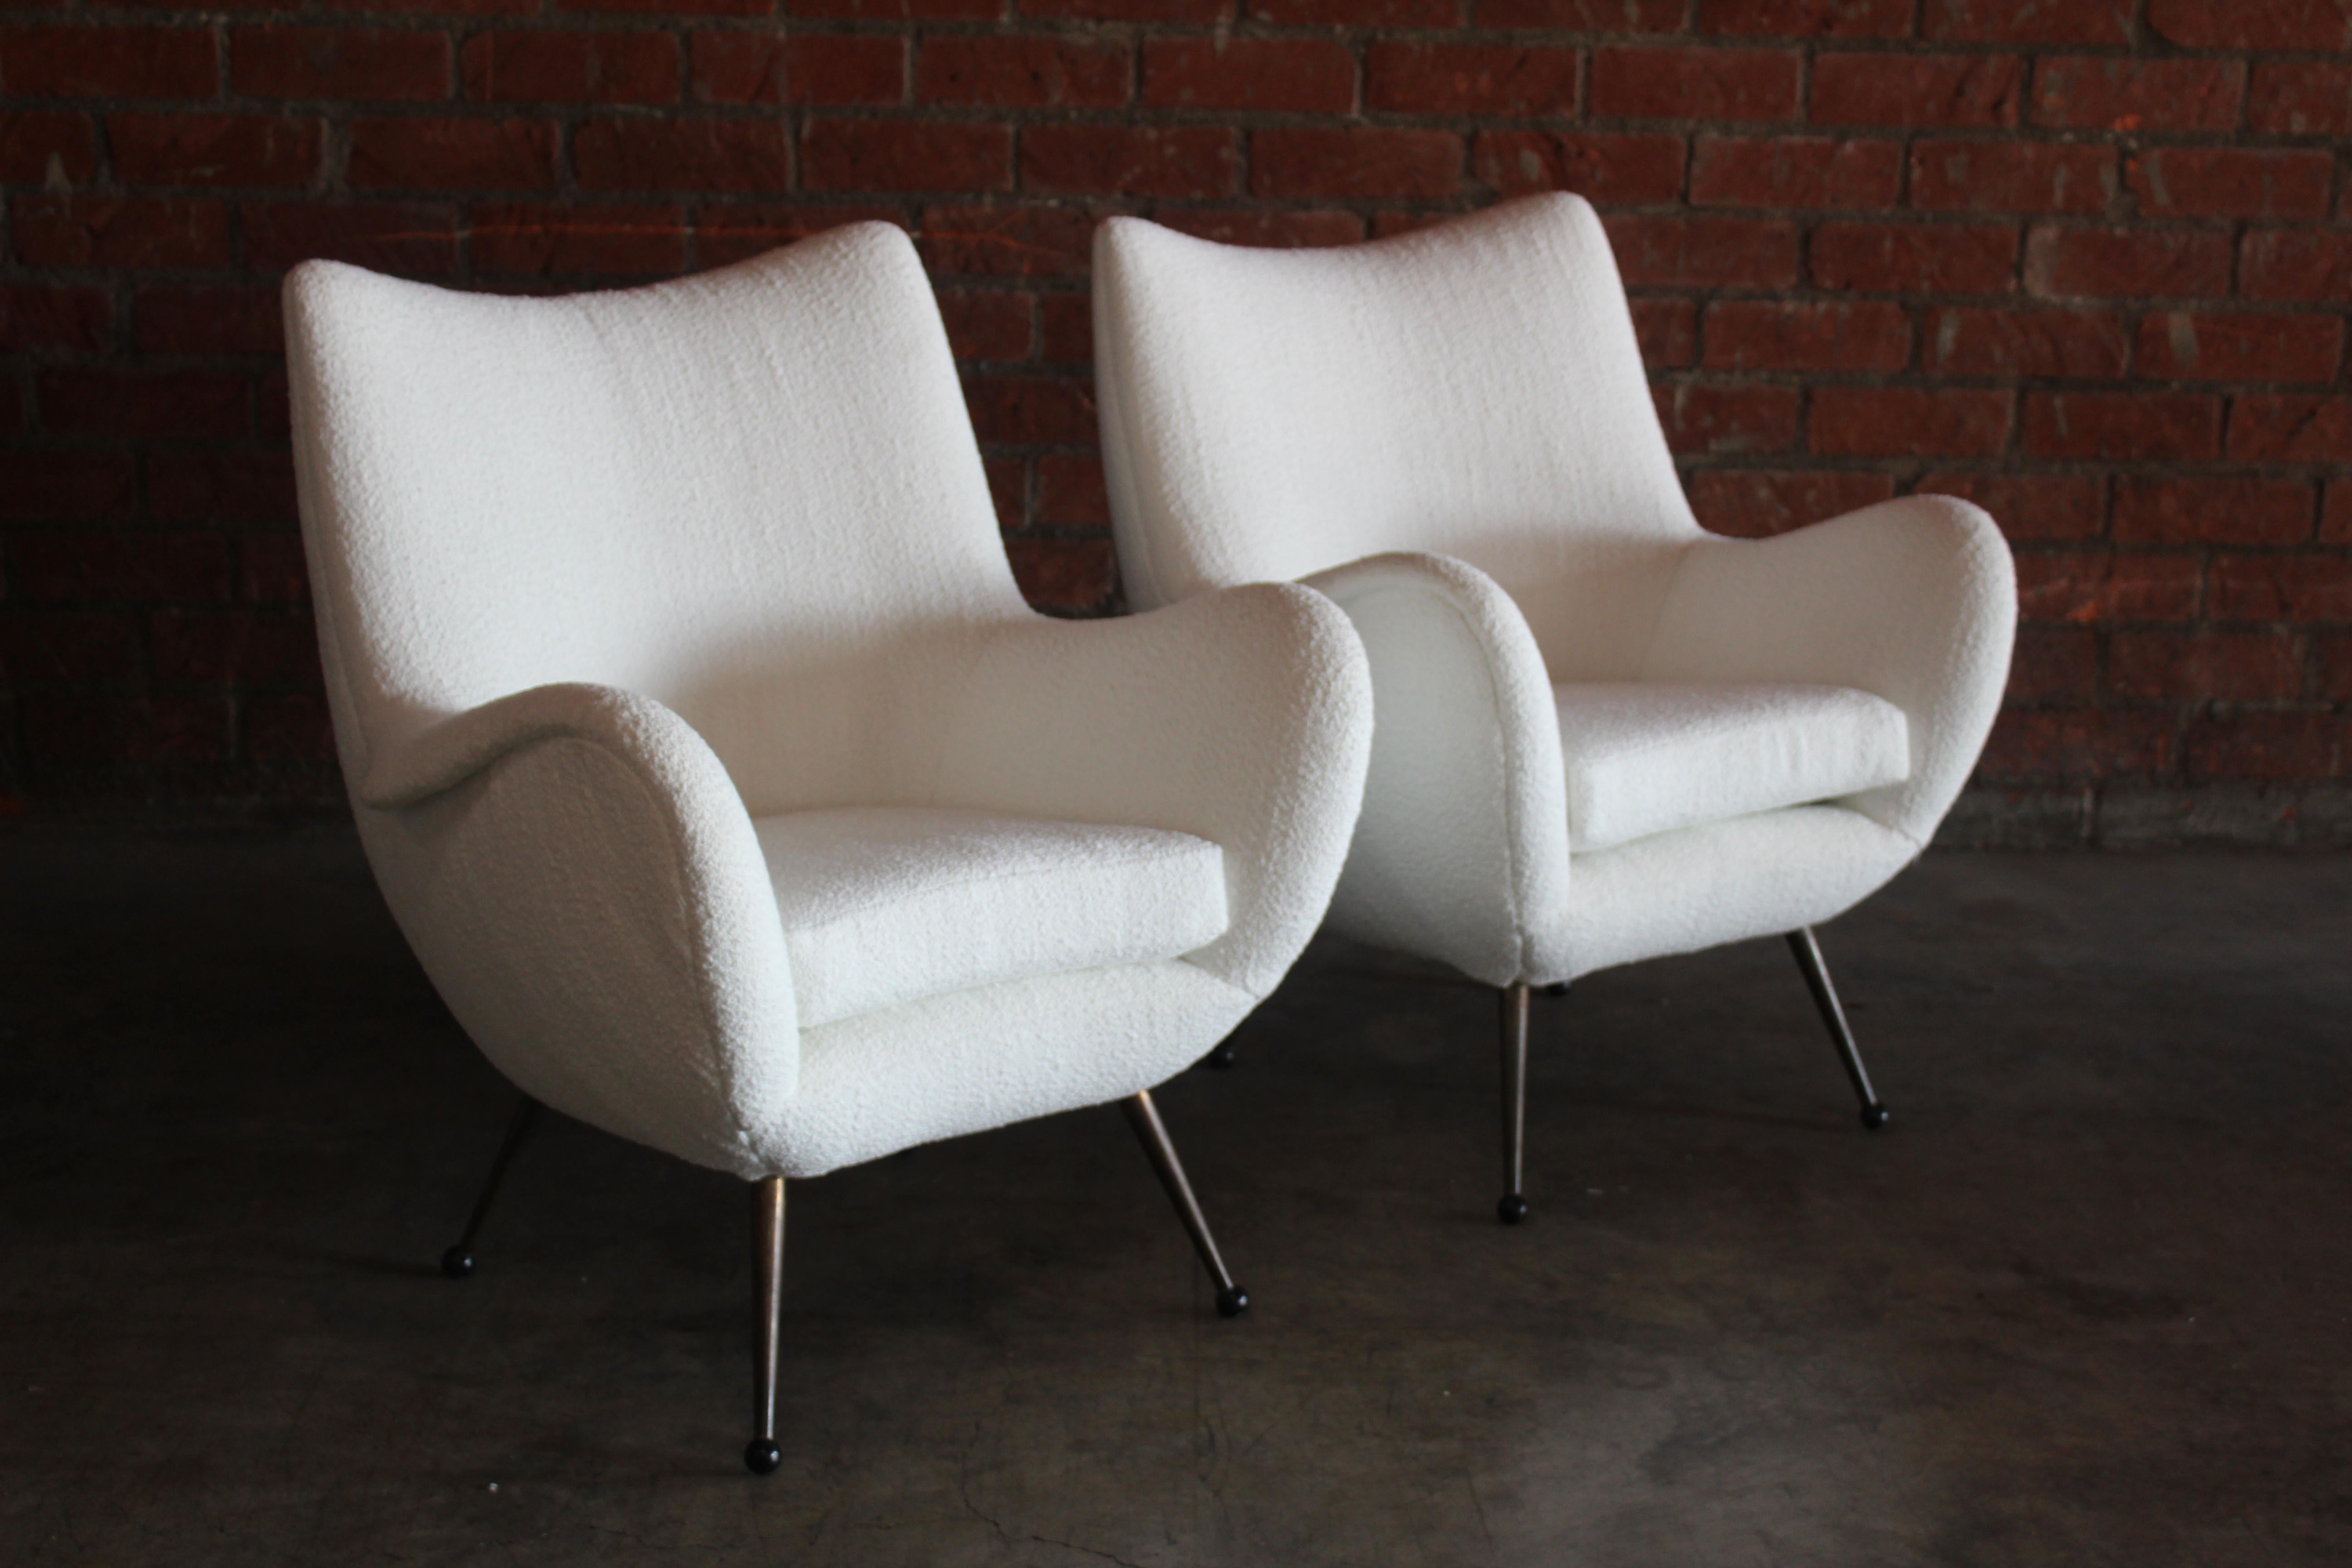 Pair of stunning vintage Italian lounge chairs from the 1950s. The pair have been fully restored and reupholstered in a Rogers and Goffigon performance boucle in white. They feature loose seat cushions and brass legs with plastic sabots. They are in